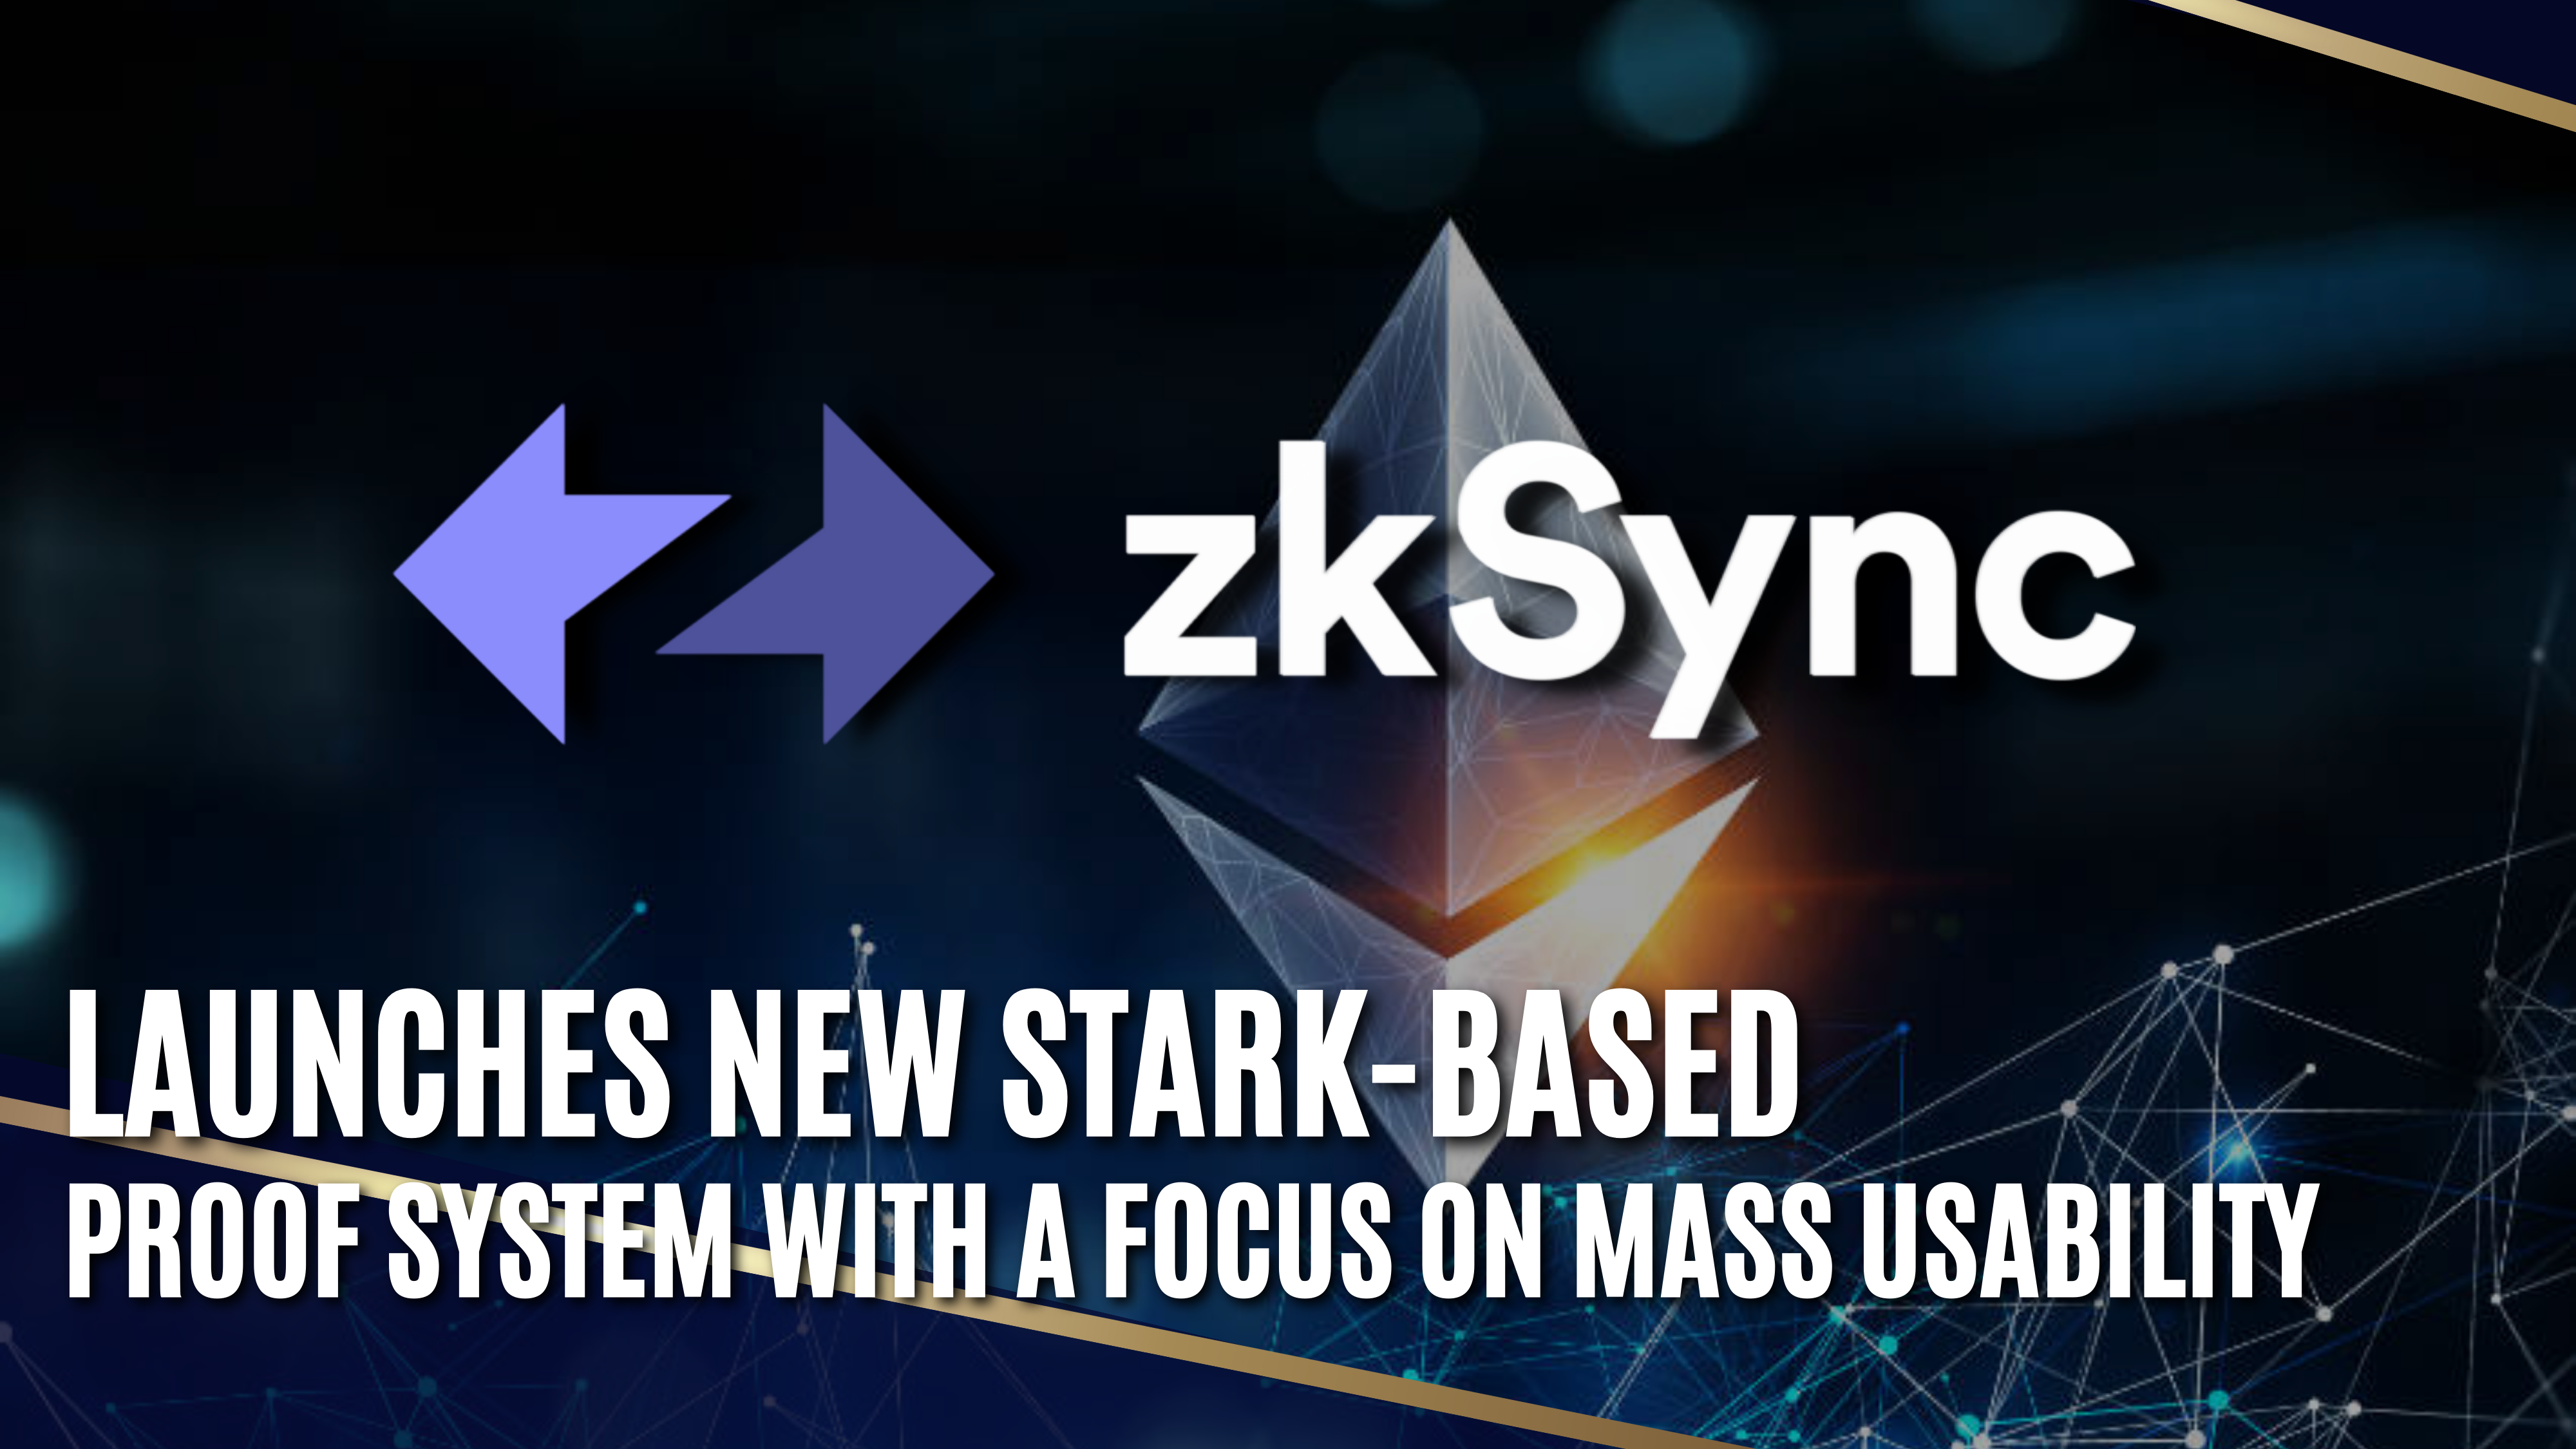 ZkSync launches new STARK-based proof system